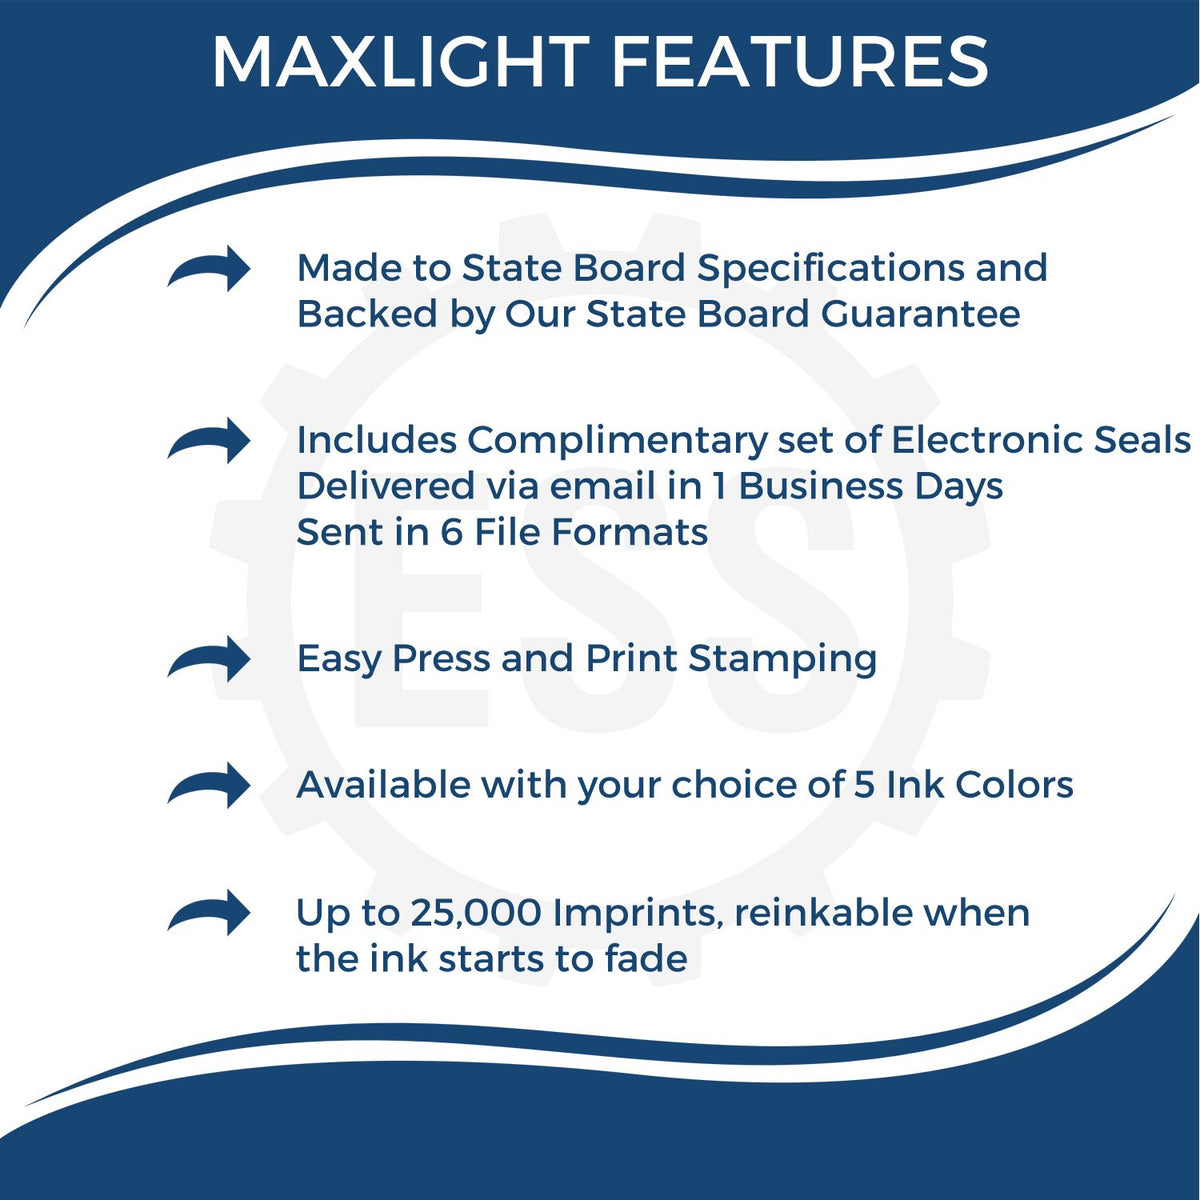 A picture of an infographic highlighting the selling points for the Premium MaxLight Pre-Inked Illinois Landscape Architectural Stamp